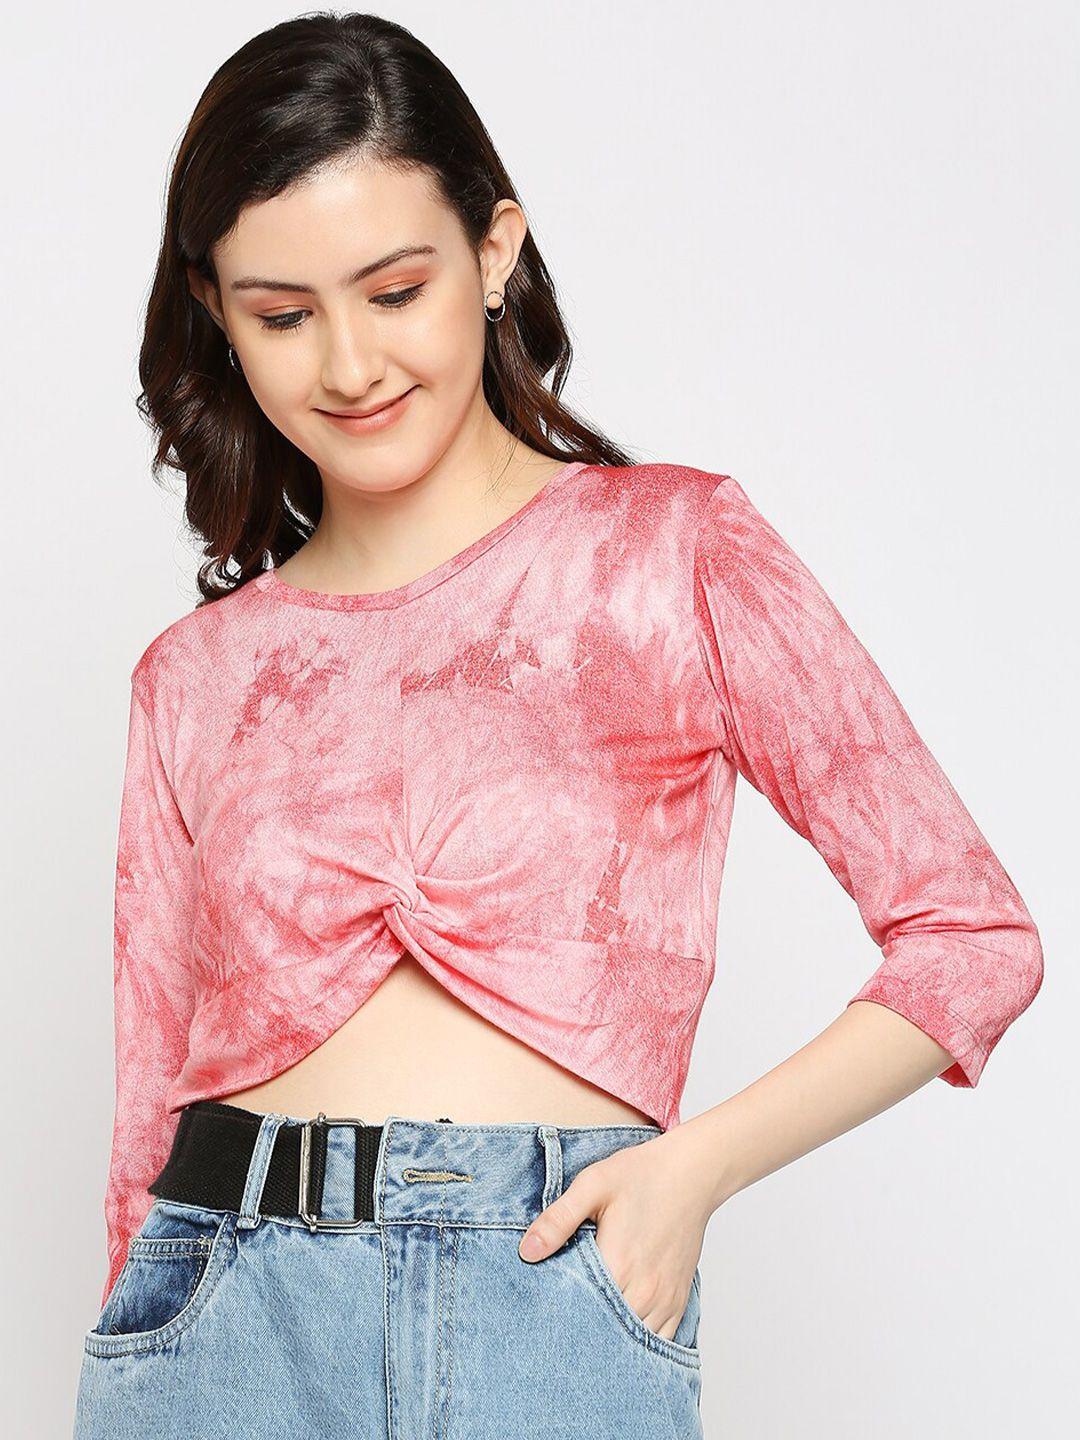 disrupt peach-coloured twisted crop top